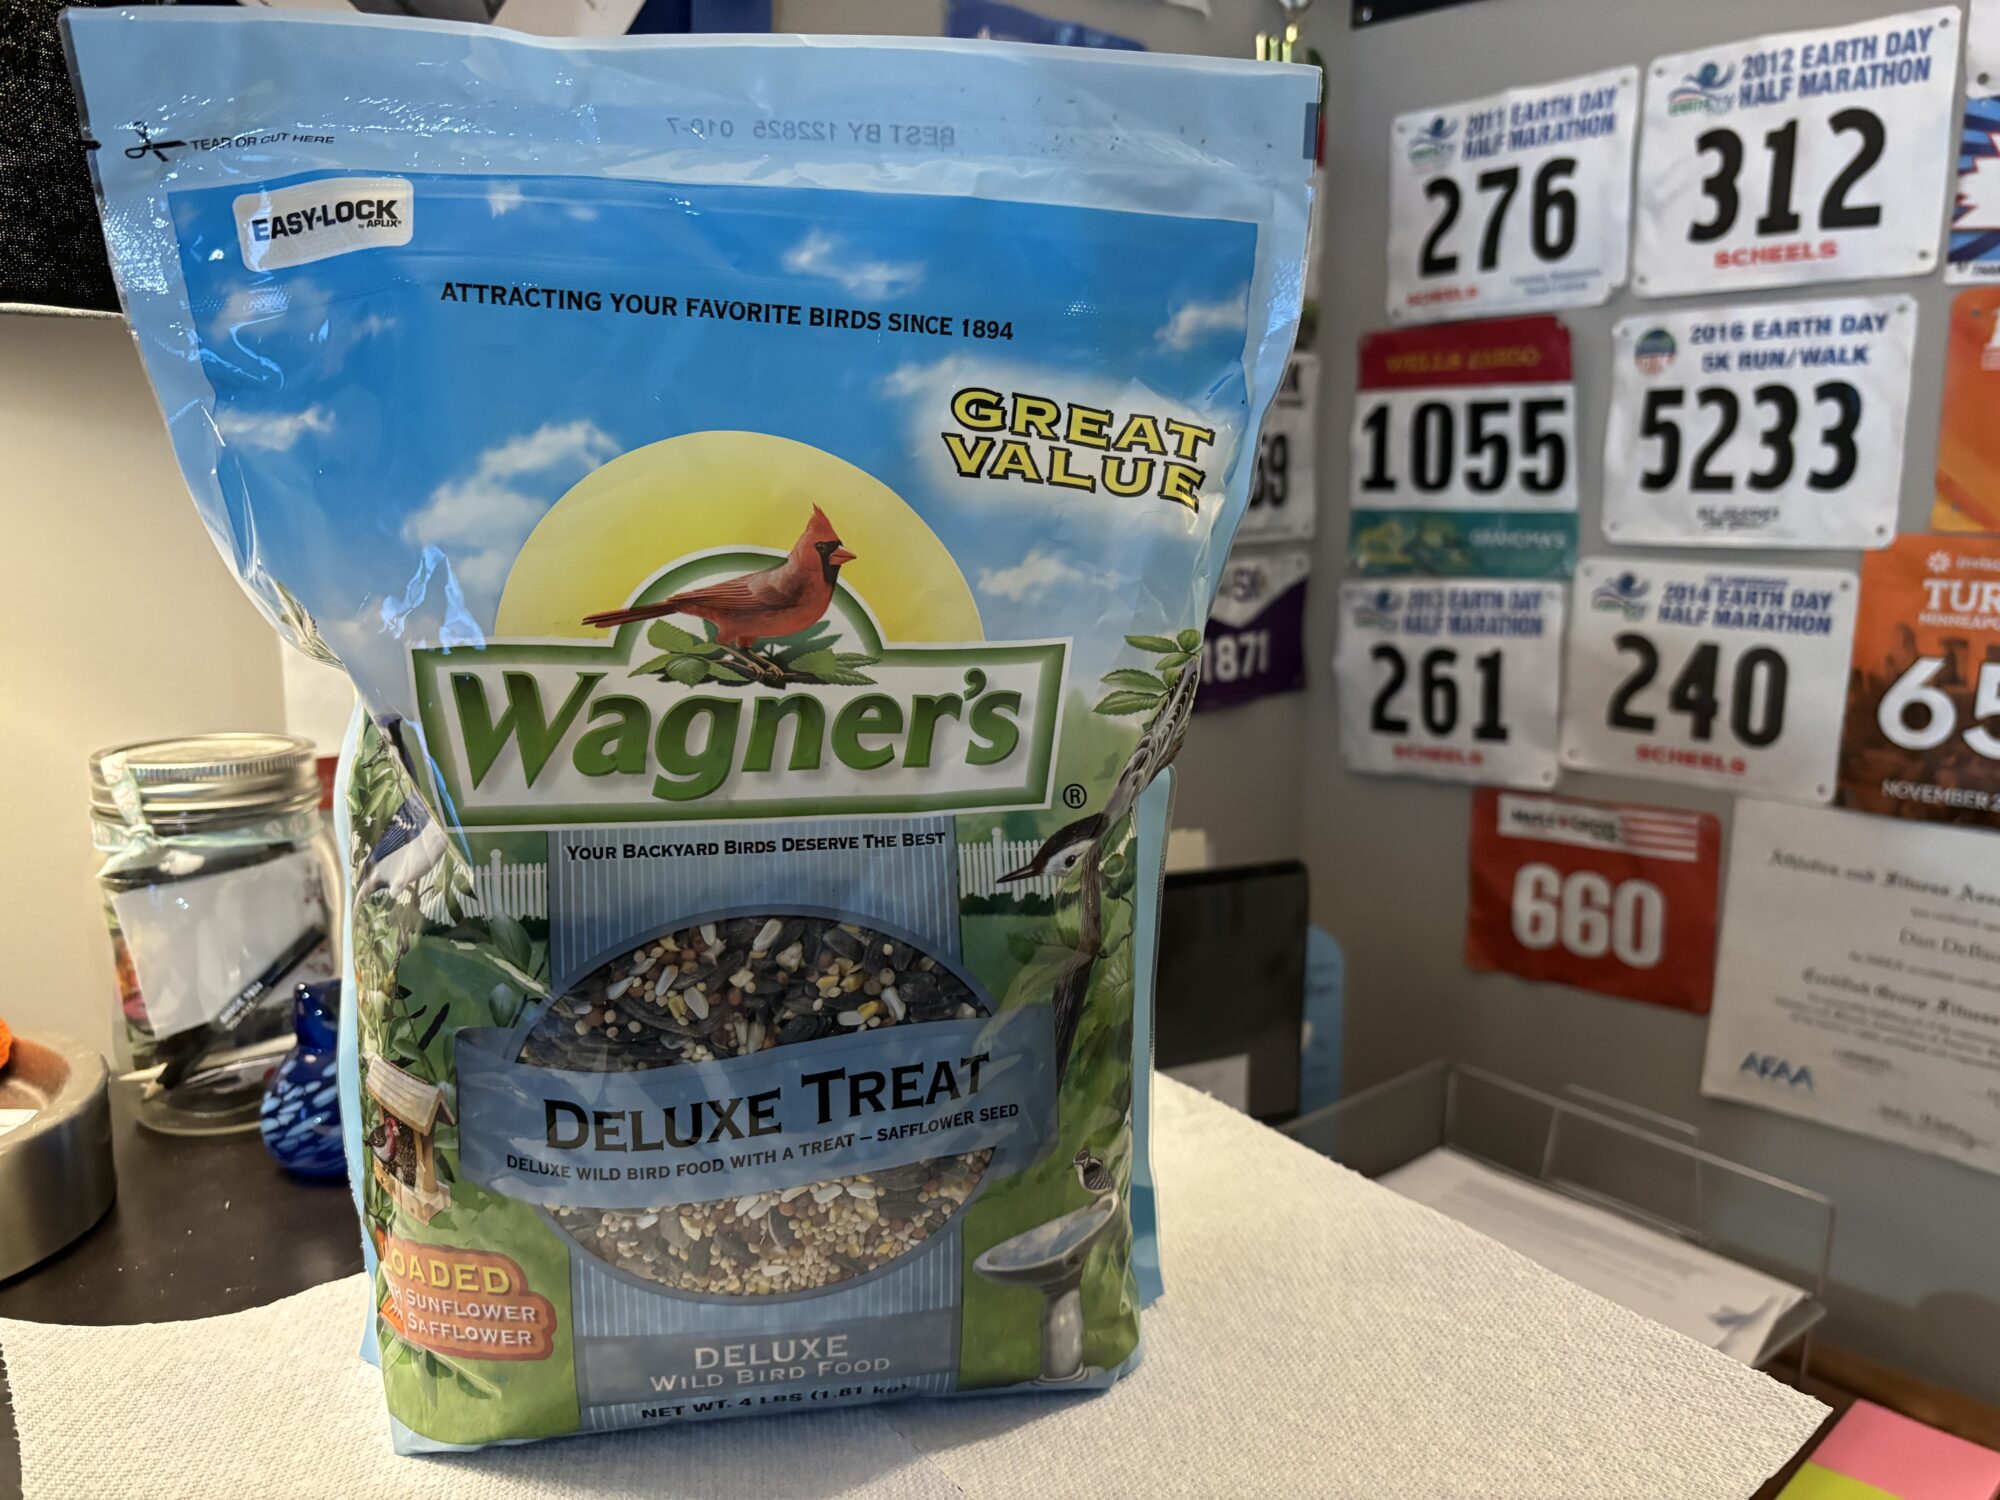 A bag of Wagner's Bird Seed on a desk